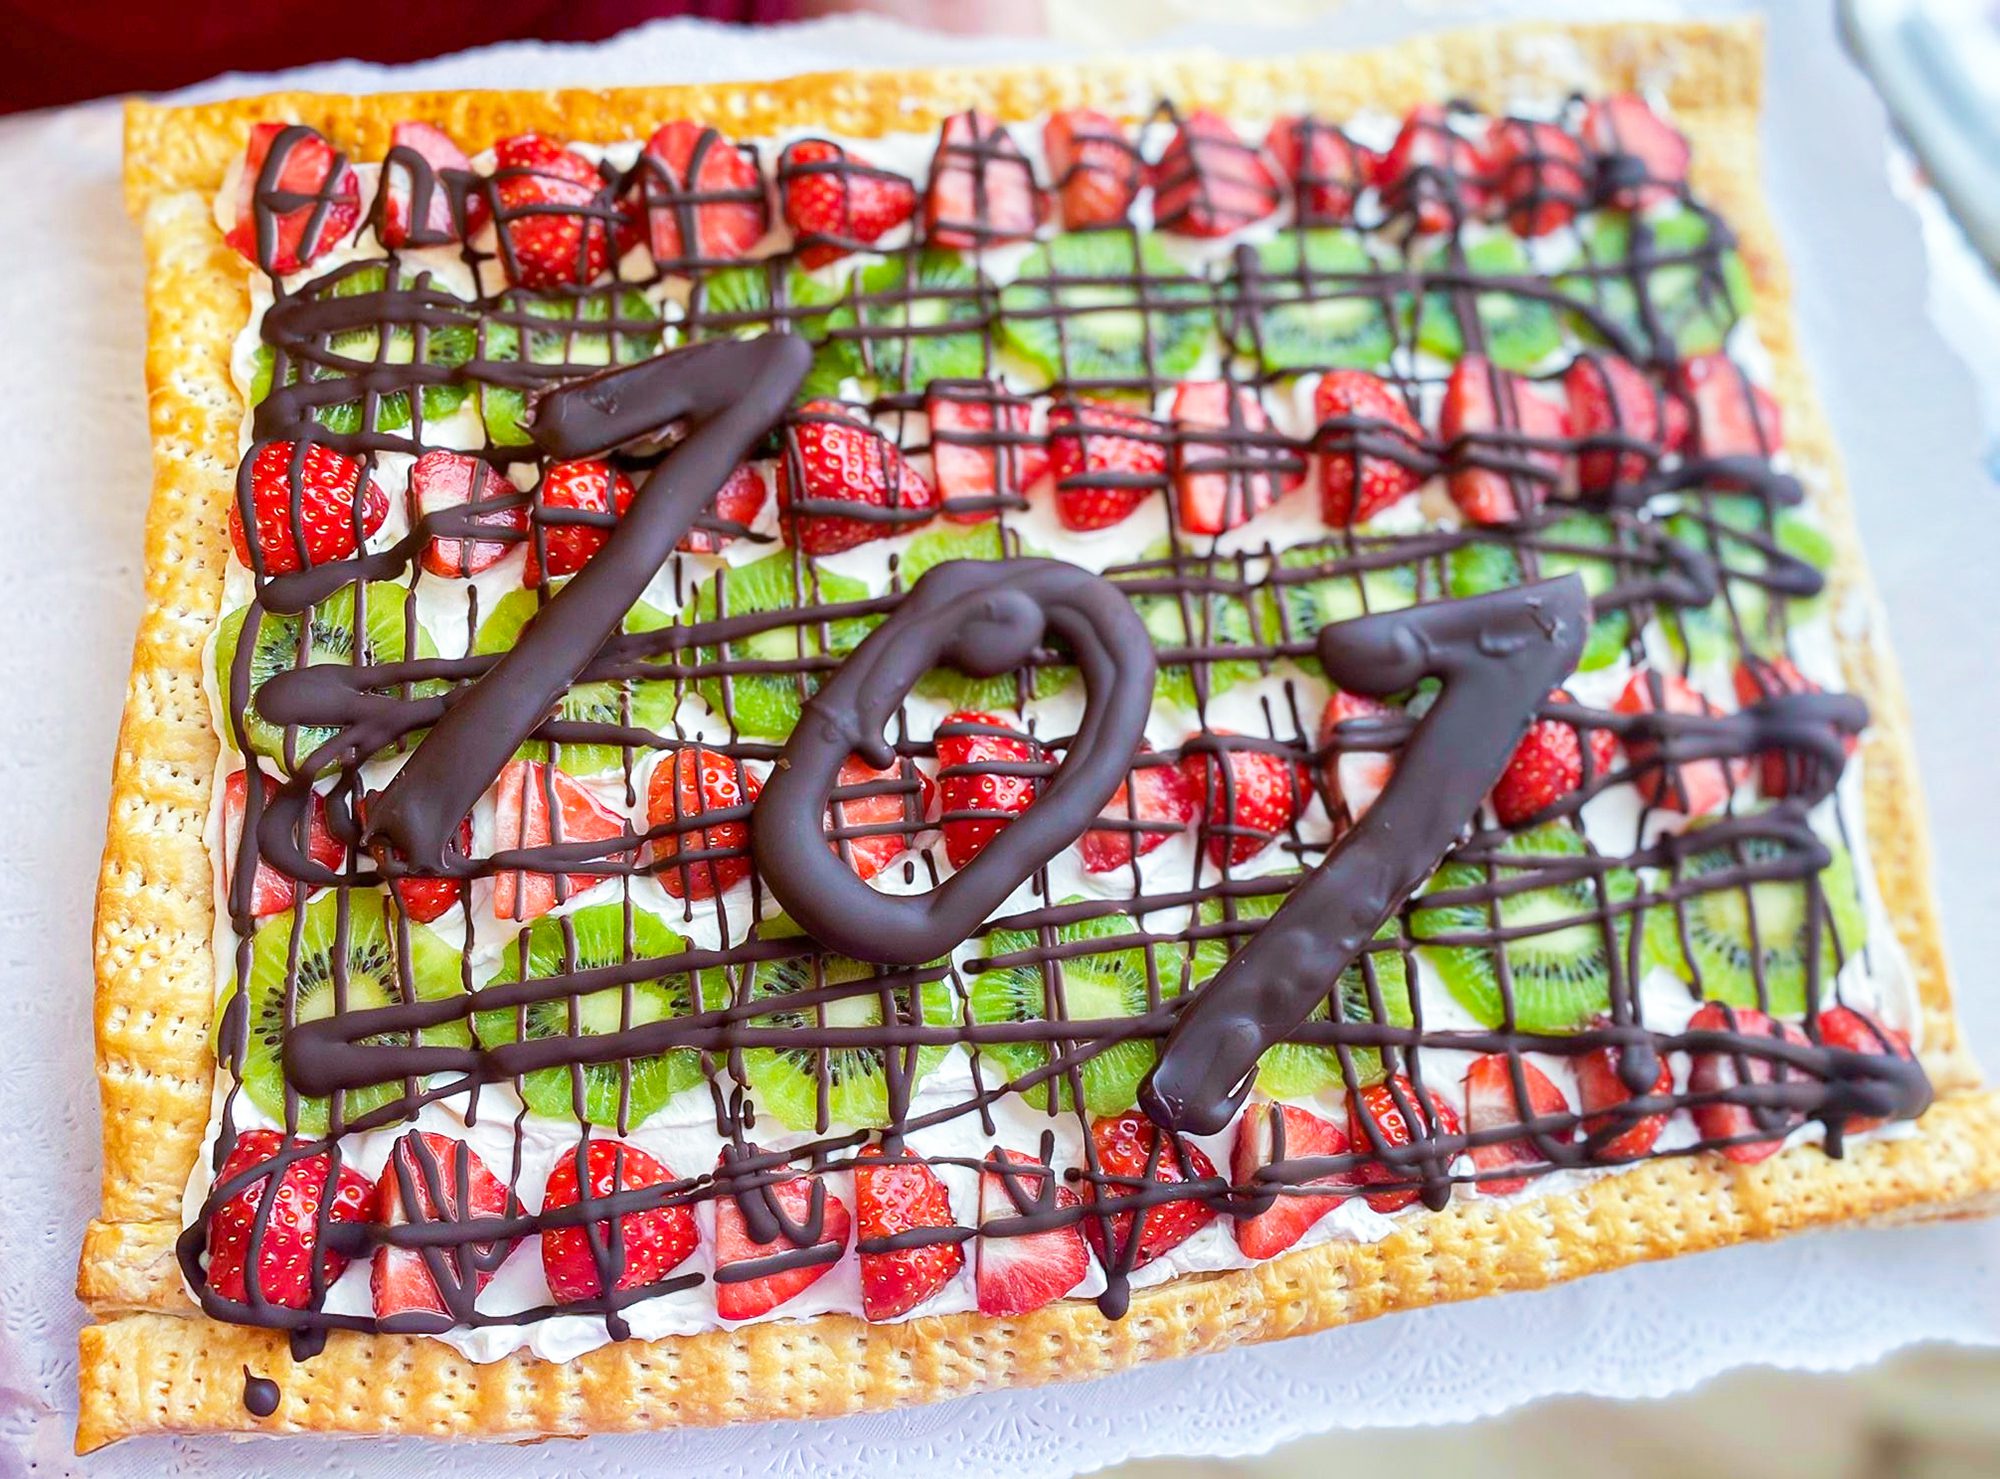 Blanche's 101st birthday cake, with strawberry and kiwi slices and drizzled with chocolate. 